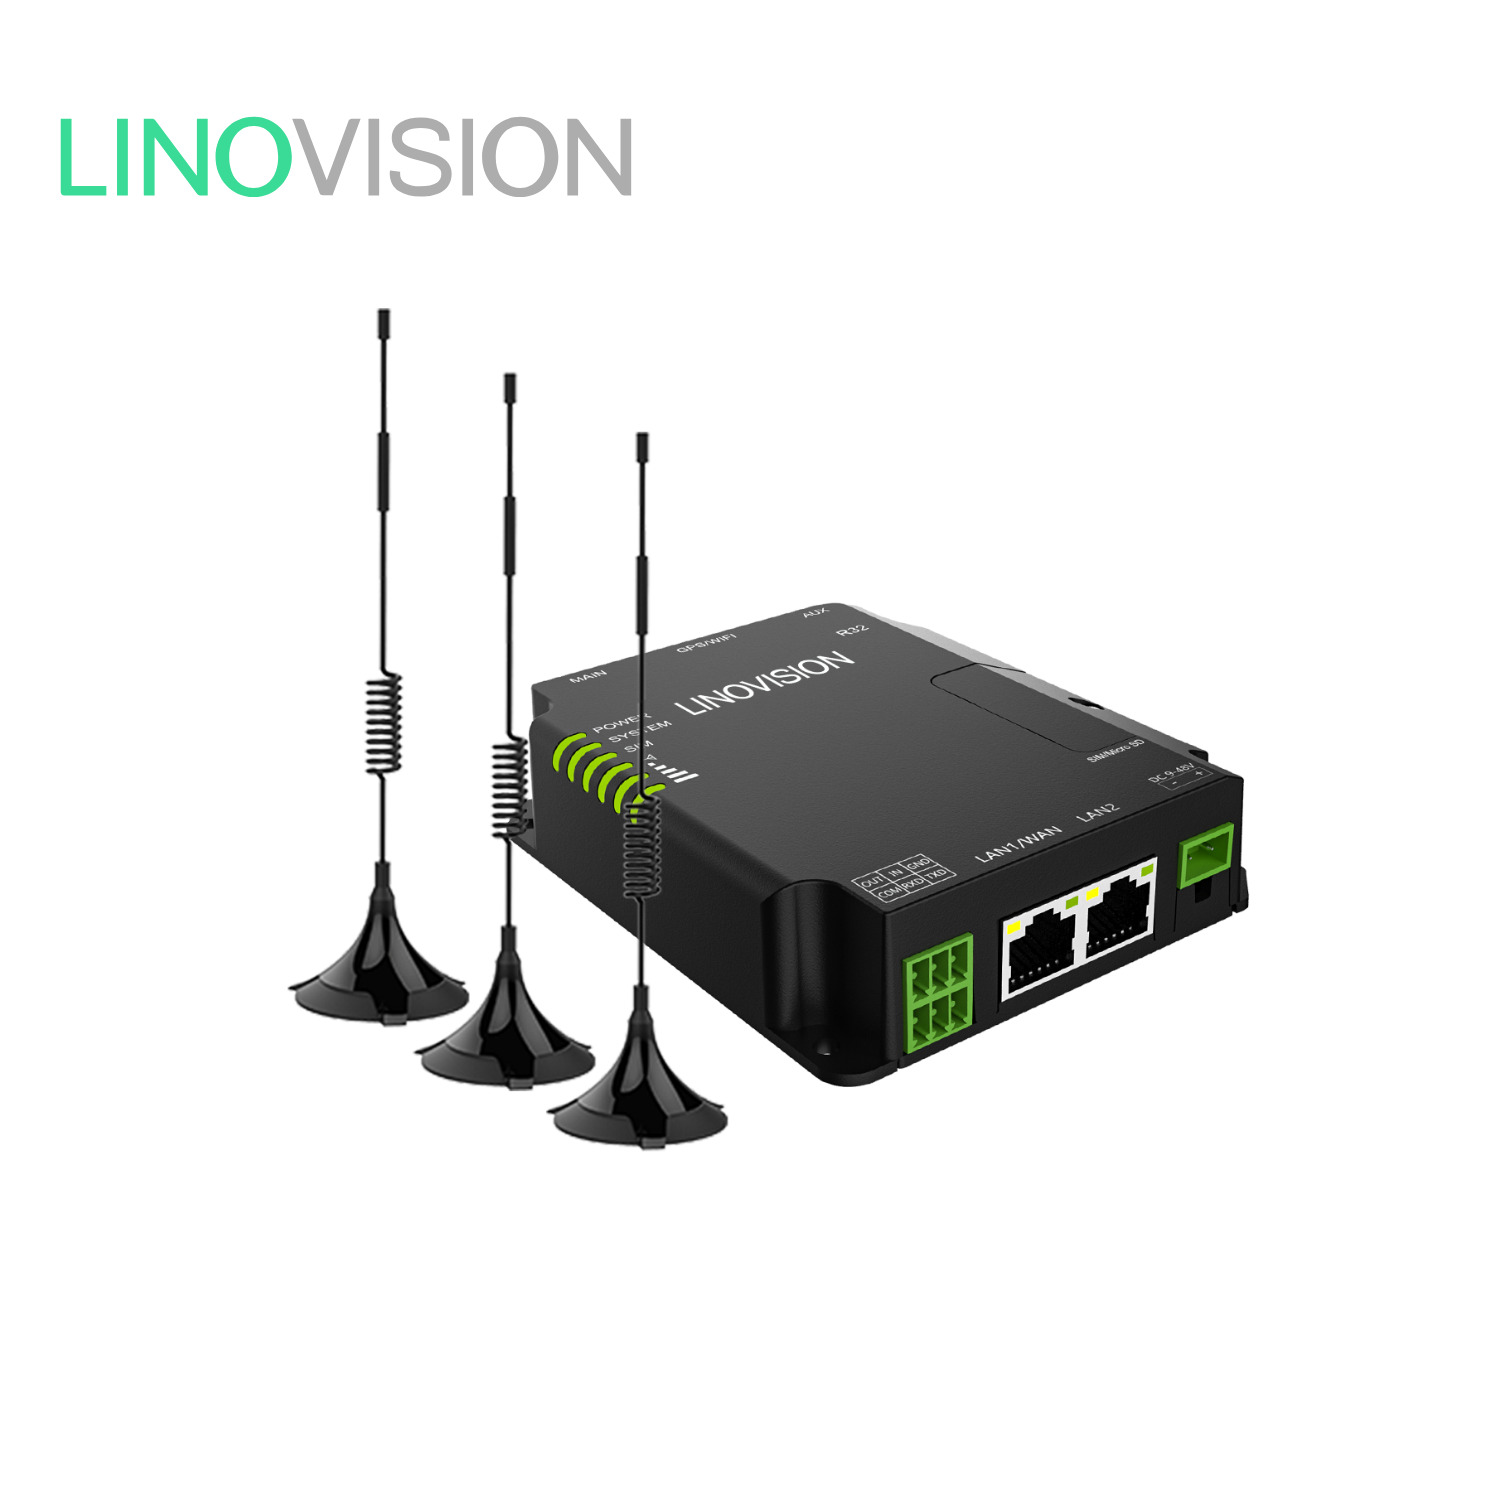 LINOVISION Industrial Unlocked 4G LTE Router Support WiFi, Dual SIM Cards, RS485